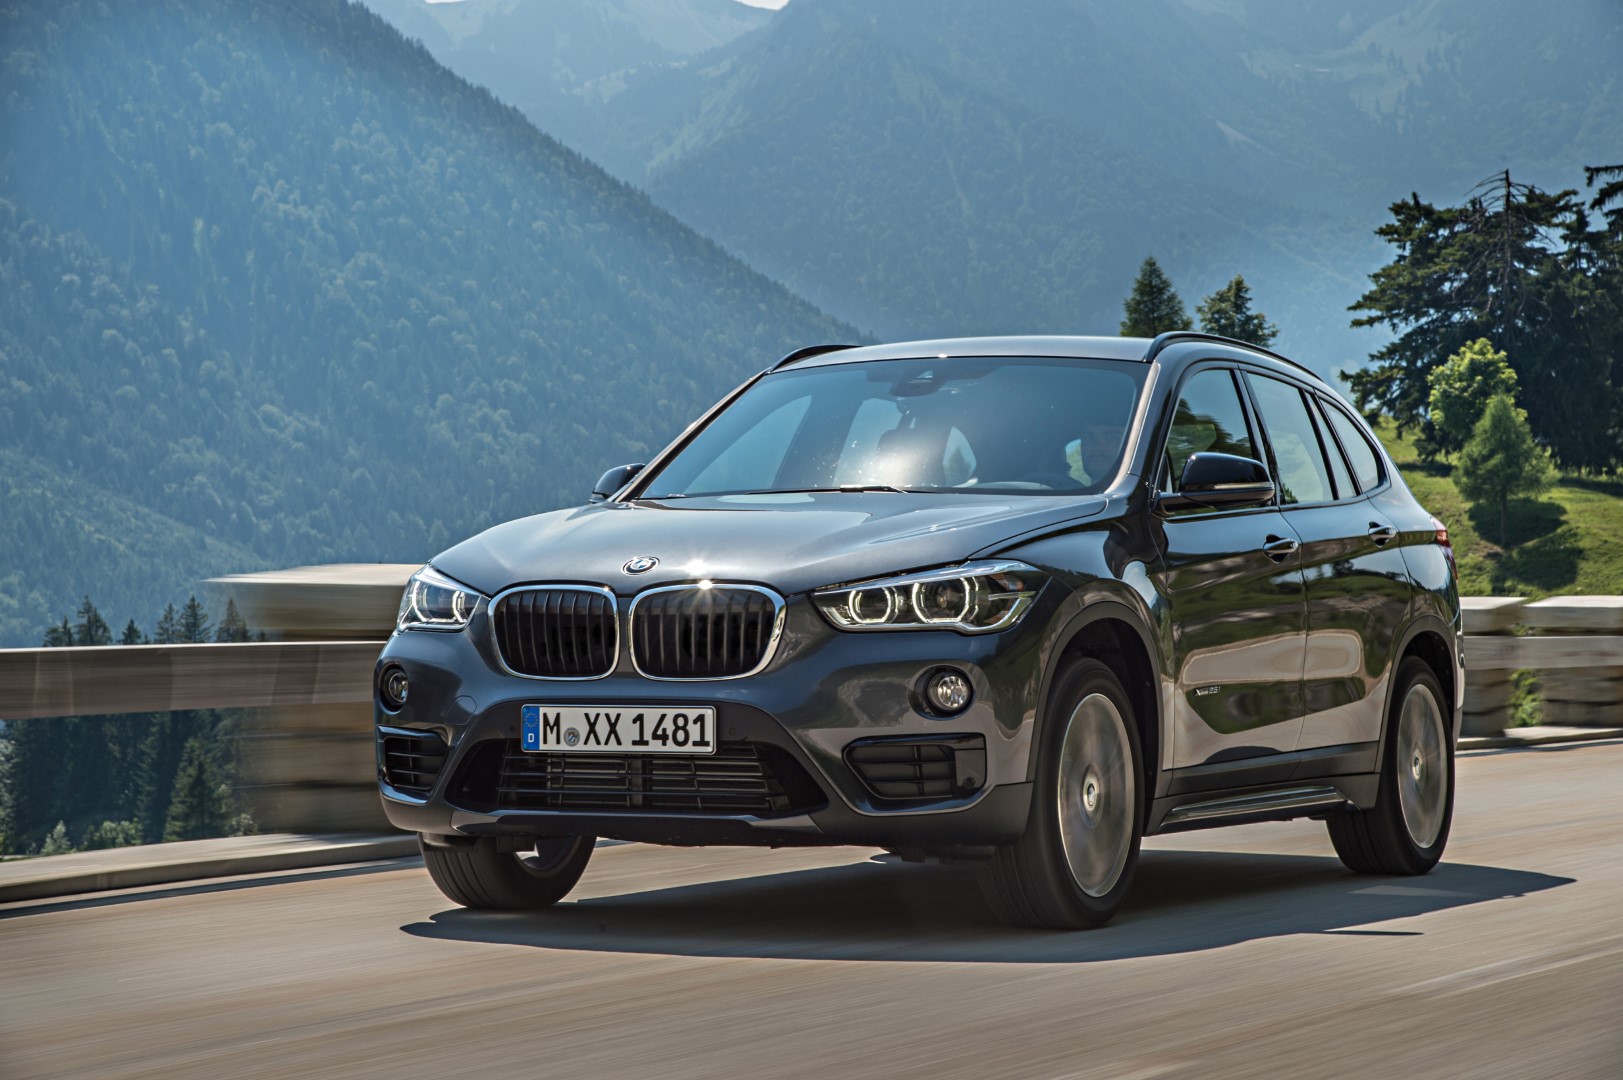 1554707770P90190731-highRes-the-new-bmw-x1-on-lo.jpg